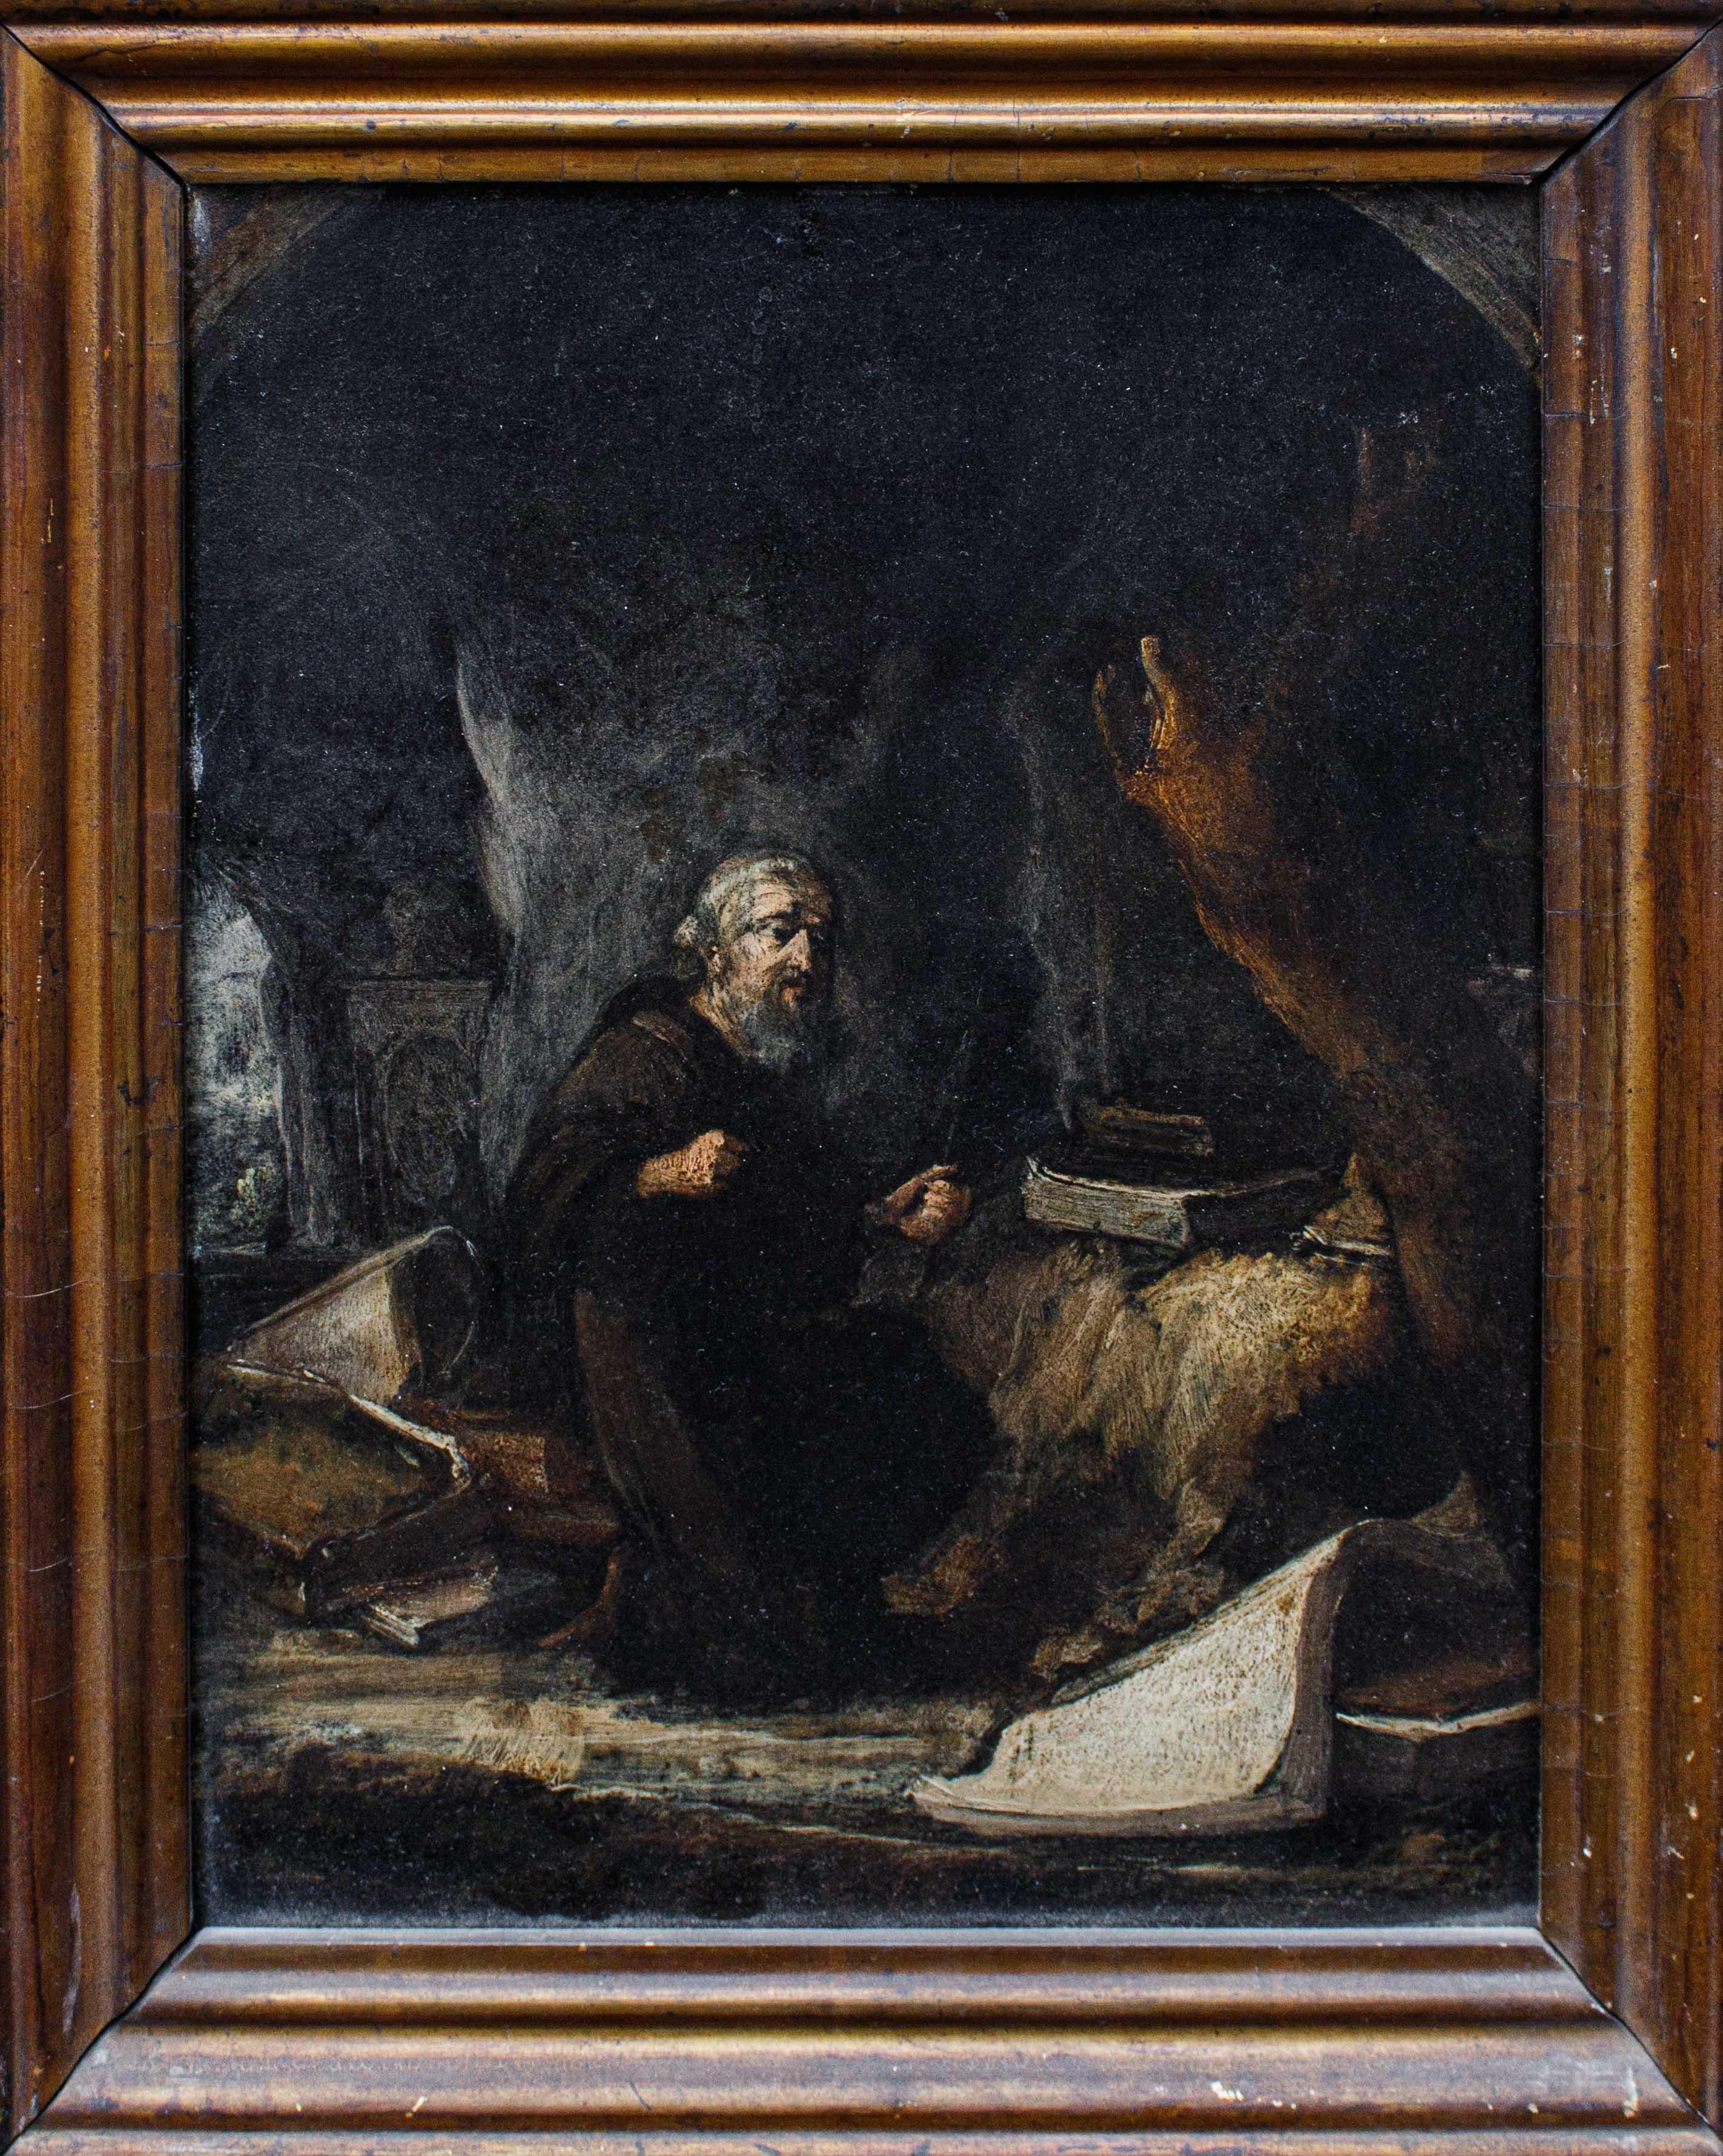 Follower of David Teniers the Younger, 17th century

St. Anthony at prayer 

Oil on copper, 38 x 30 cm

Framed, 43 x 35 cm

From the late 16th century, the complex symbolism used by Bosch gave way to a proliferation of rather suggestive demons.